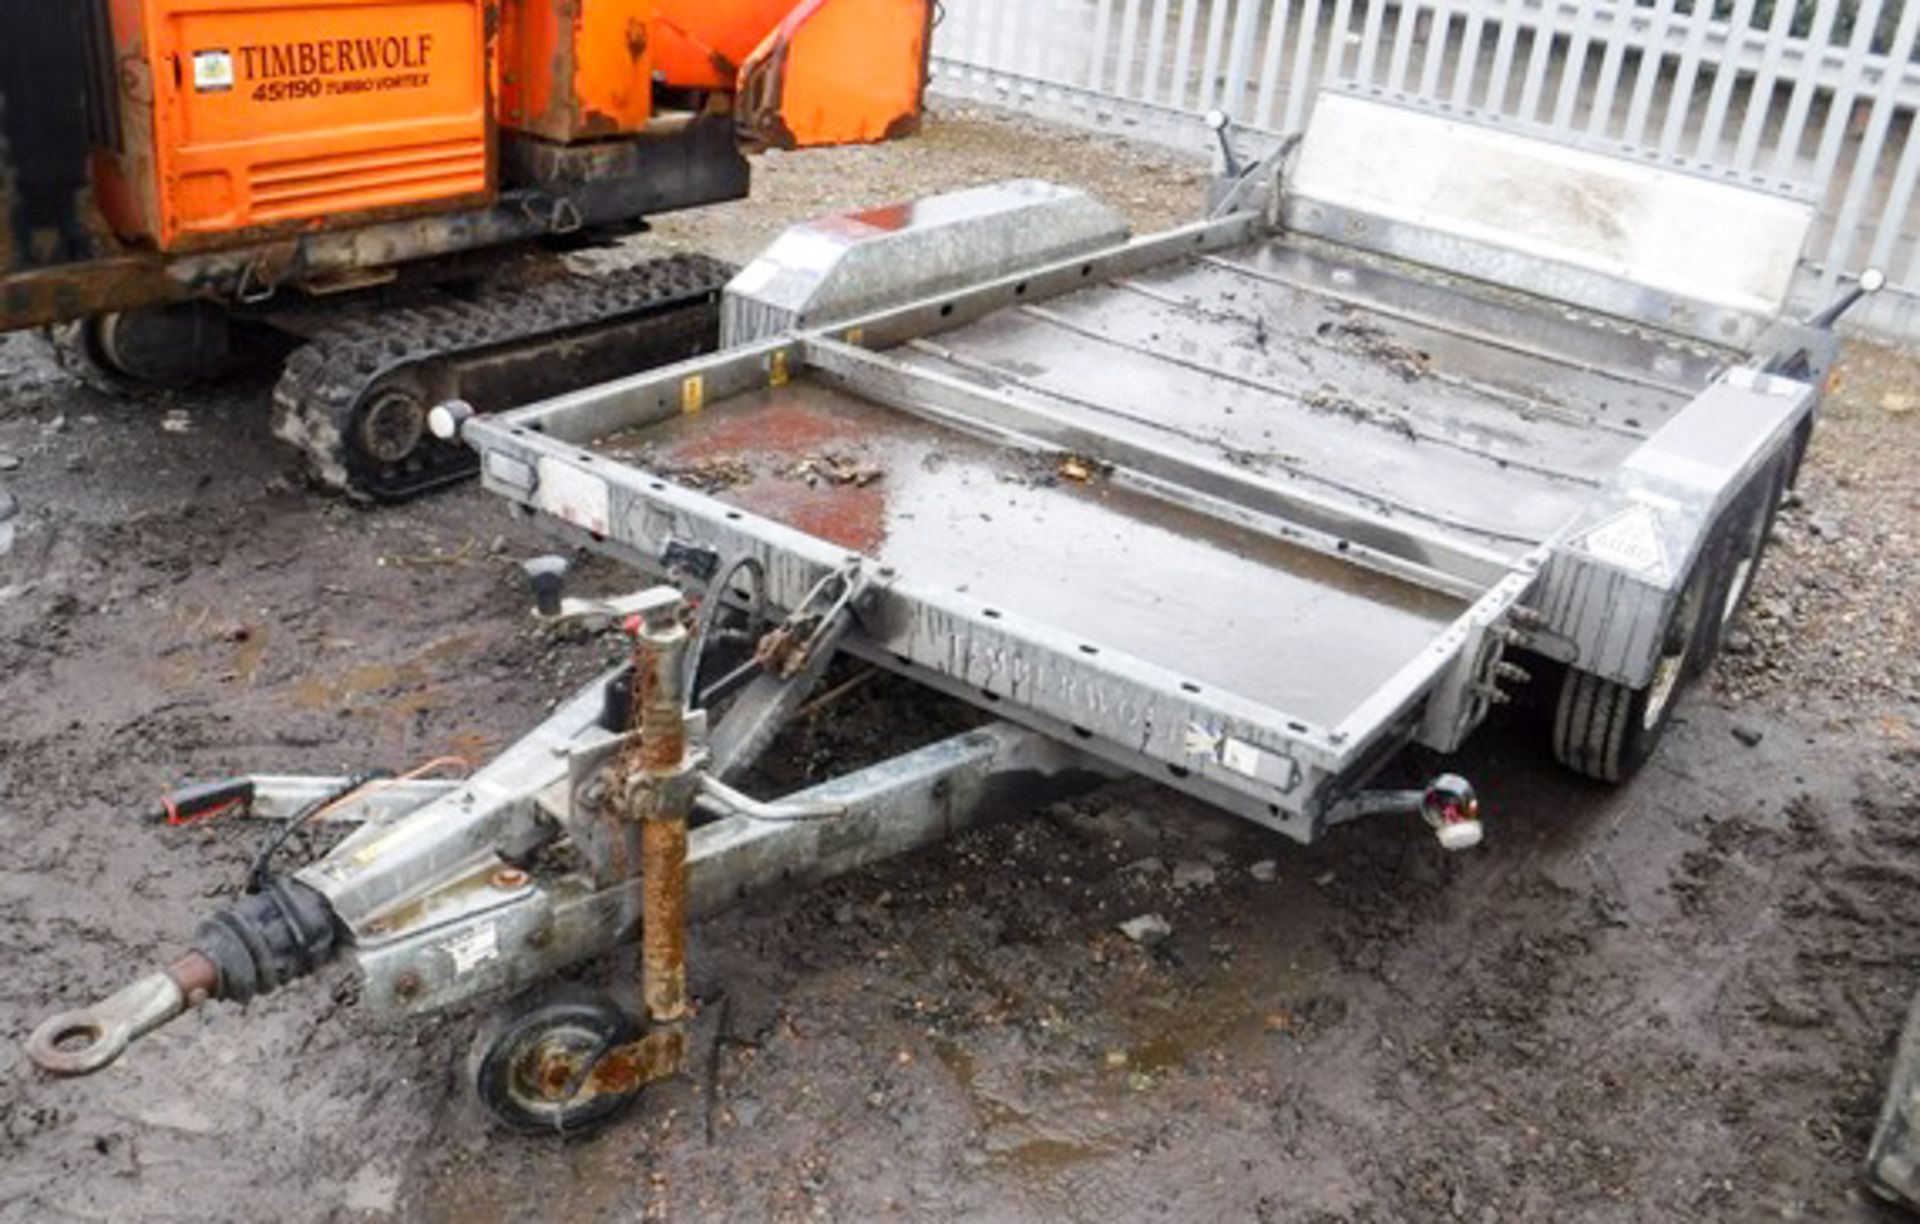 BRIAN JAMES 3M X 1.5M TWIN AXLE TILTING TRAILER FOR WOODCHIPPER OR OTHER SMALL PLANT, S/N 210178017- - Image 2 of 5